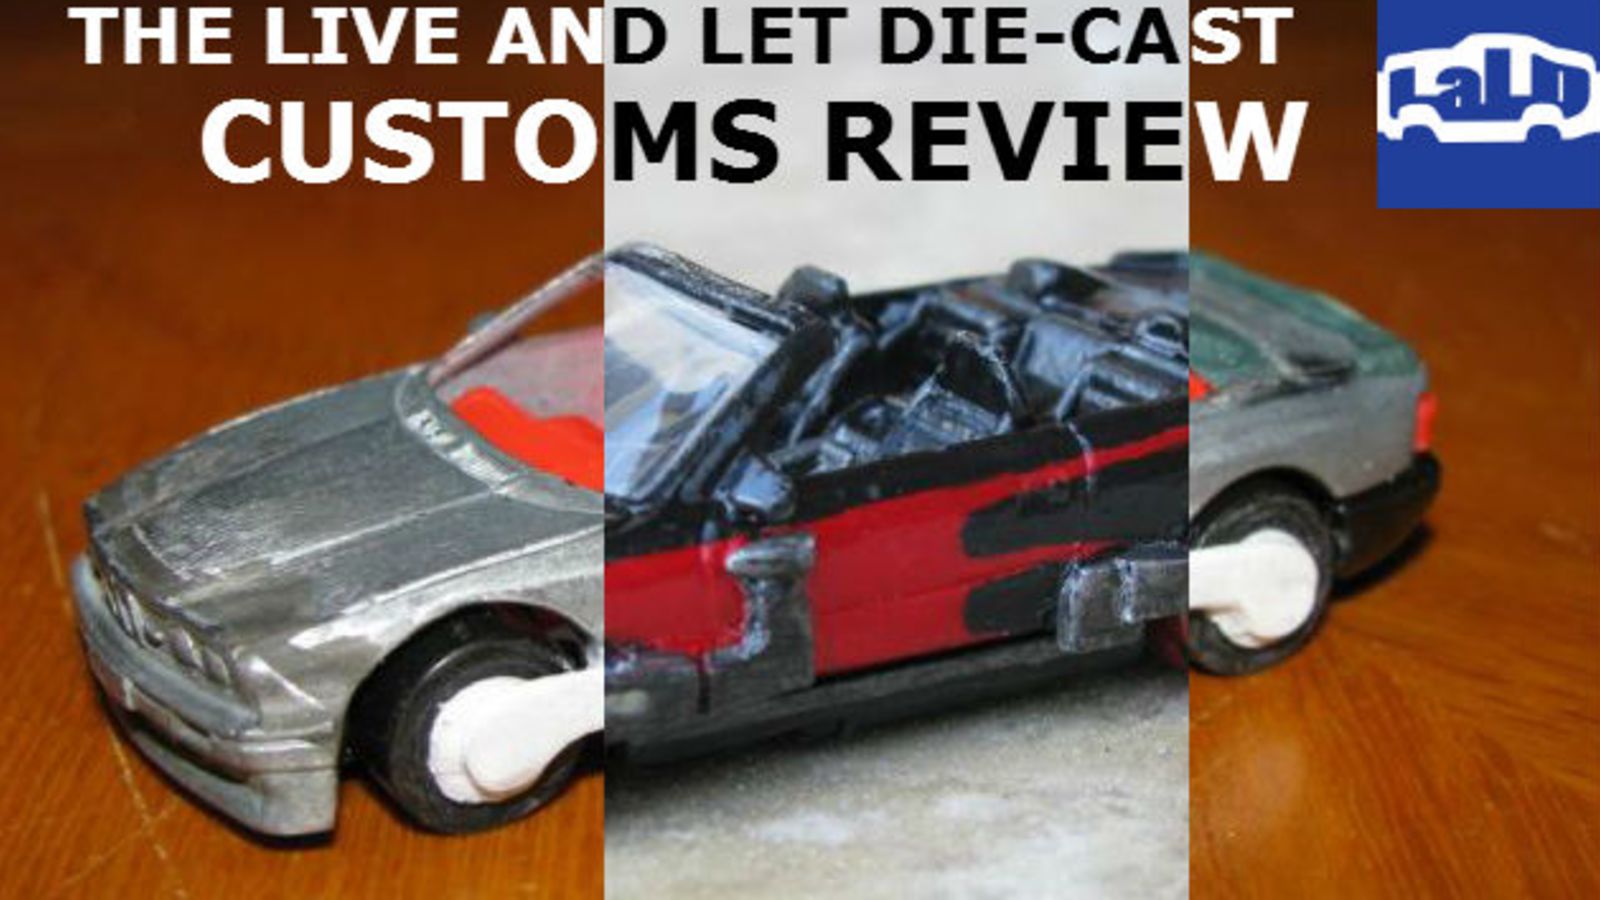 Illustration for article titled The LaLDie-Cast Customs Review - 7/7 - 7/14/2014